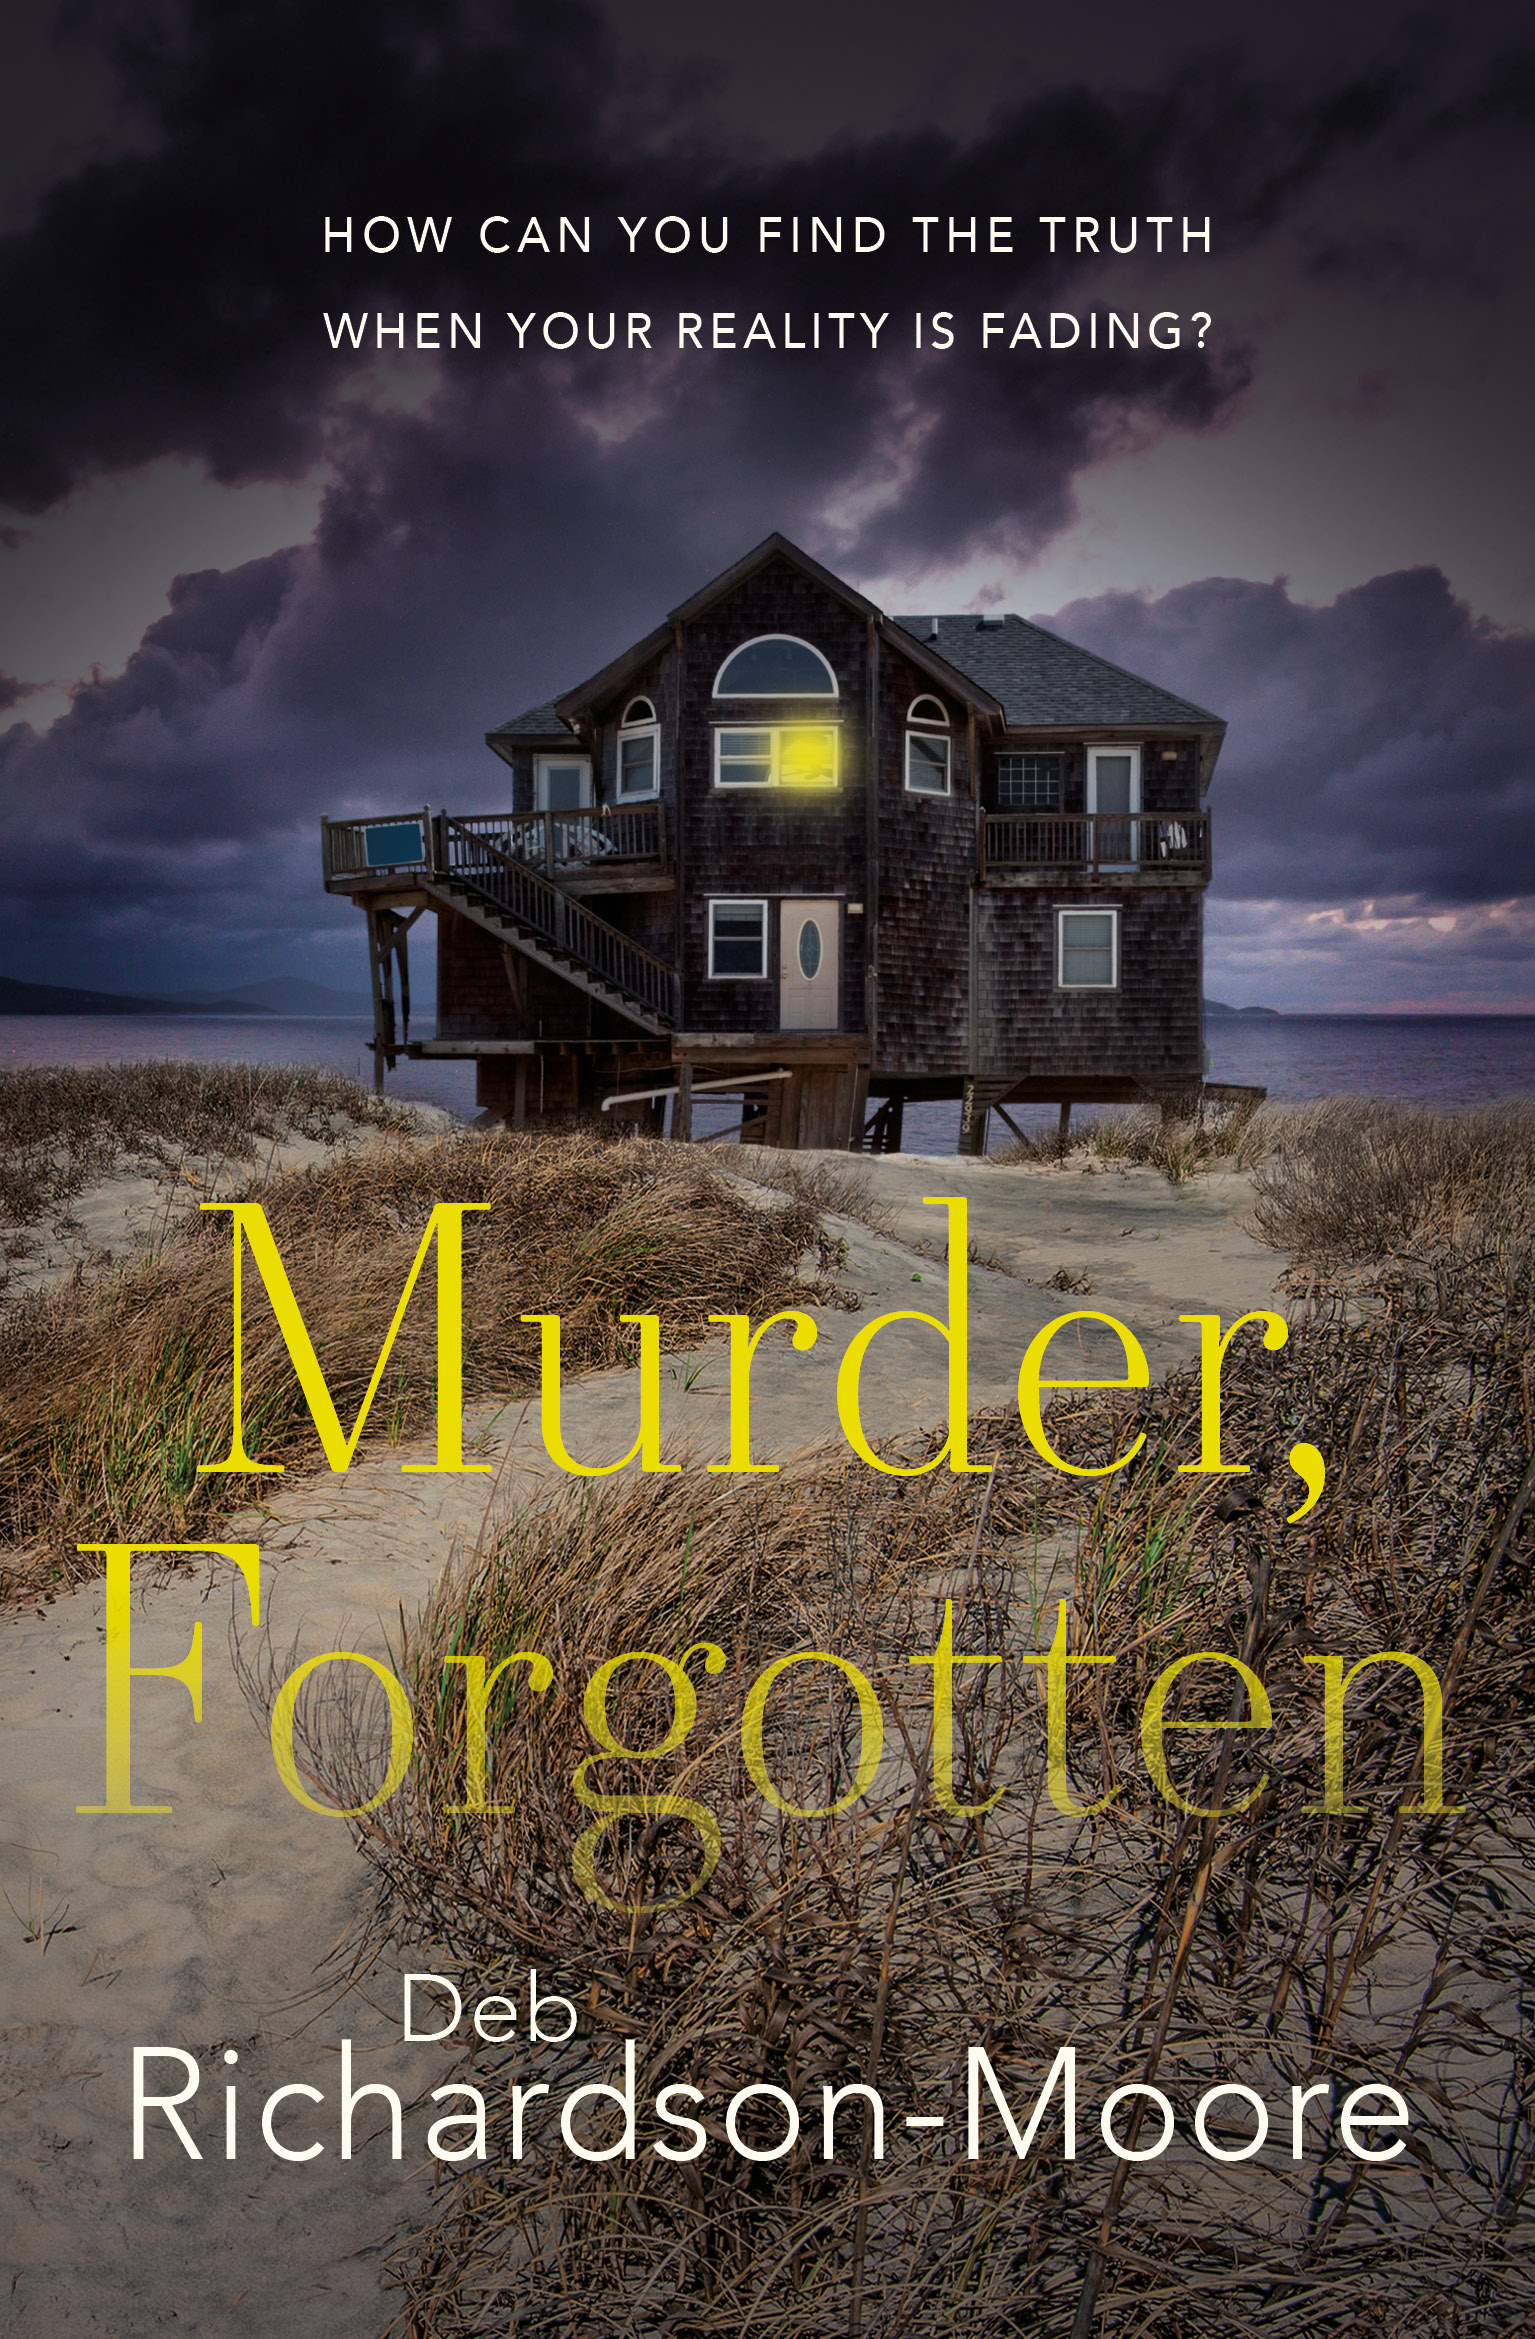 Review: Murder, Forgotten by Deb Richardson-Moore